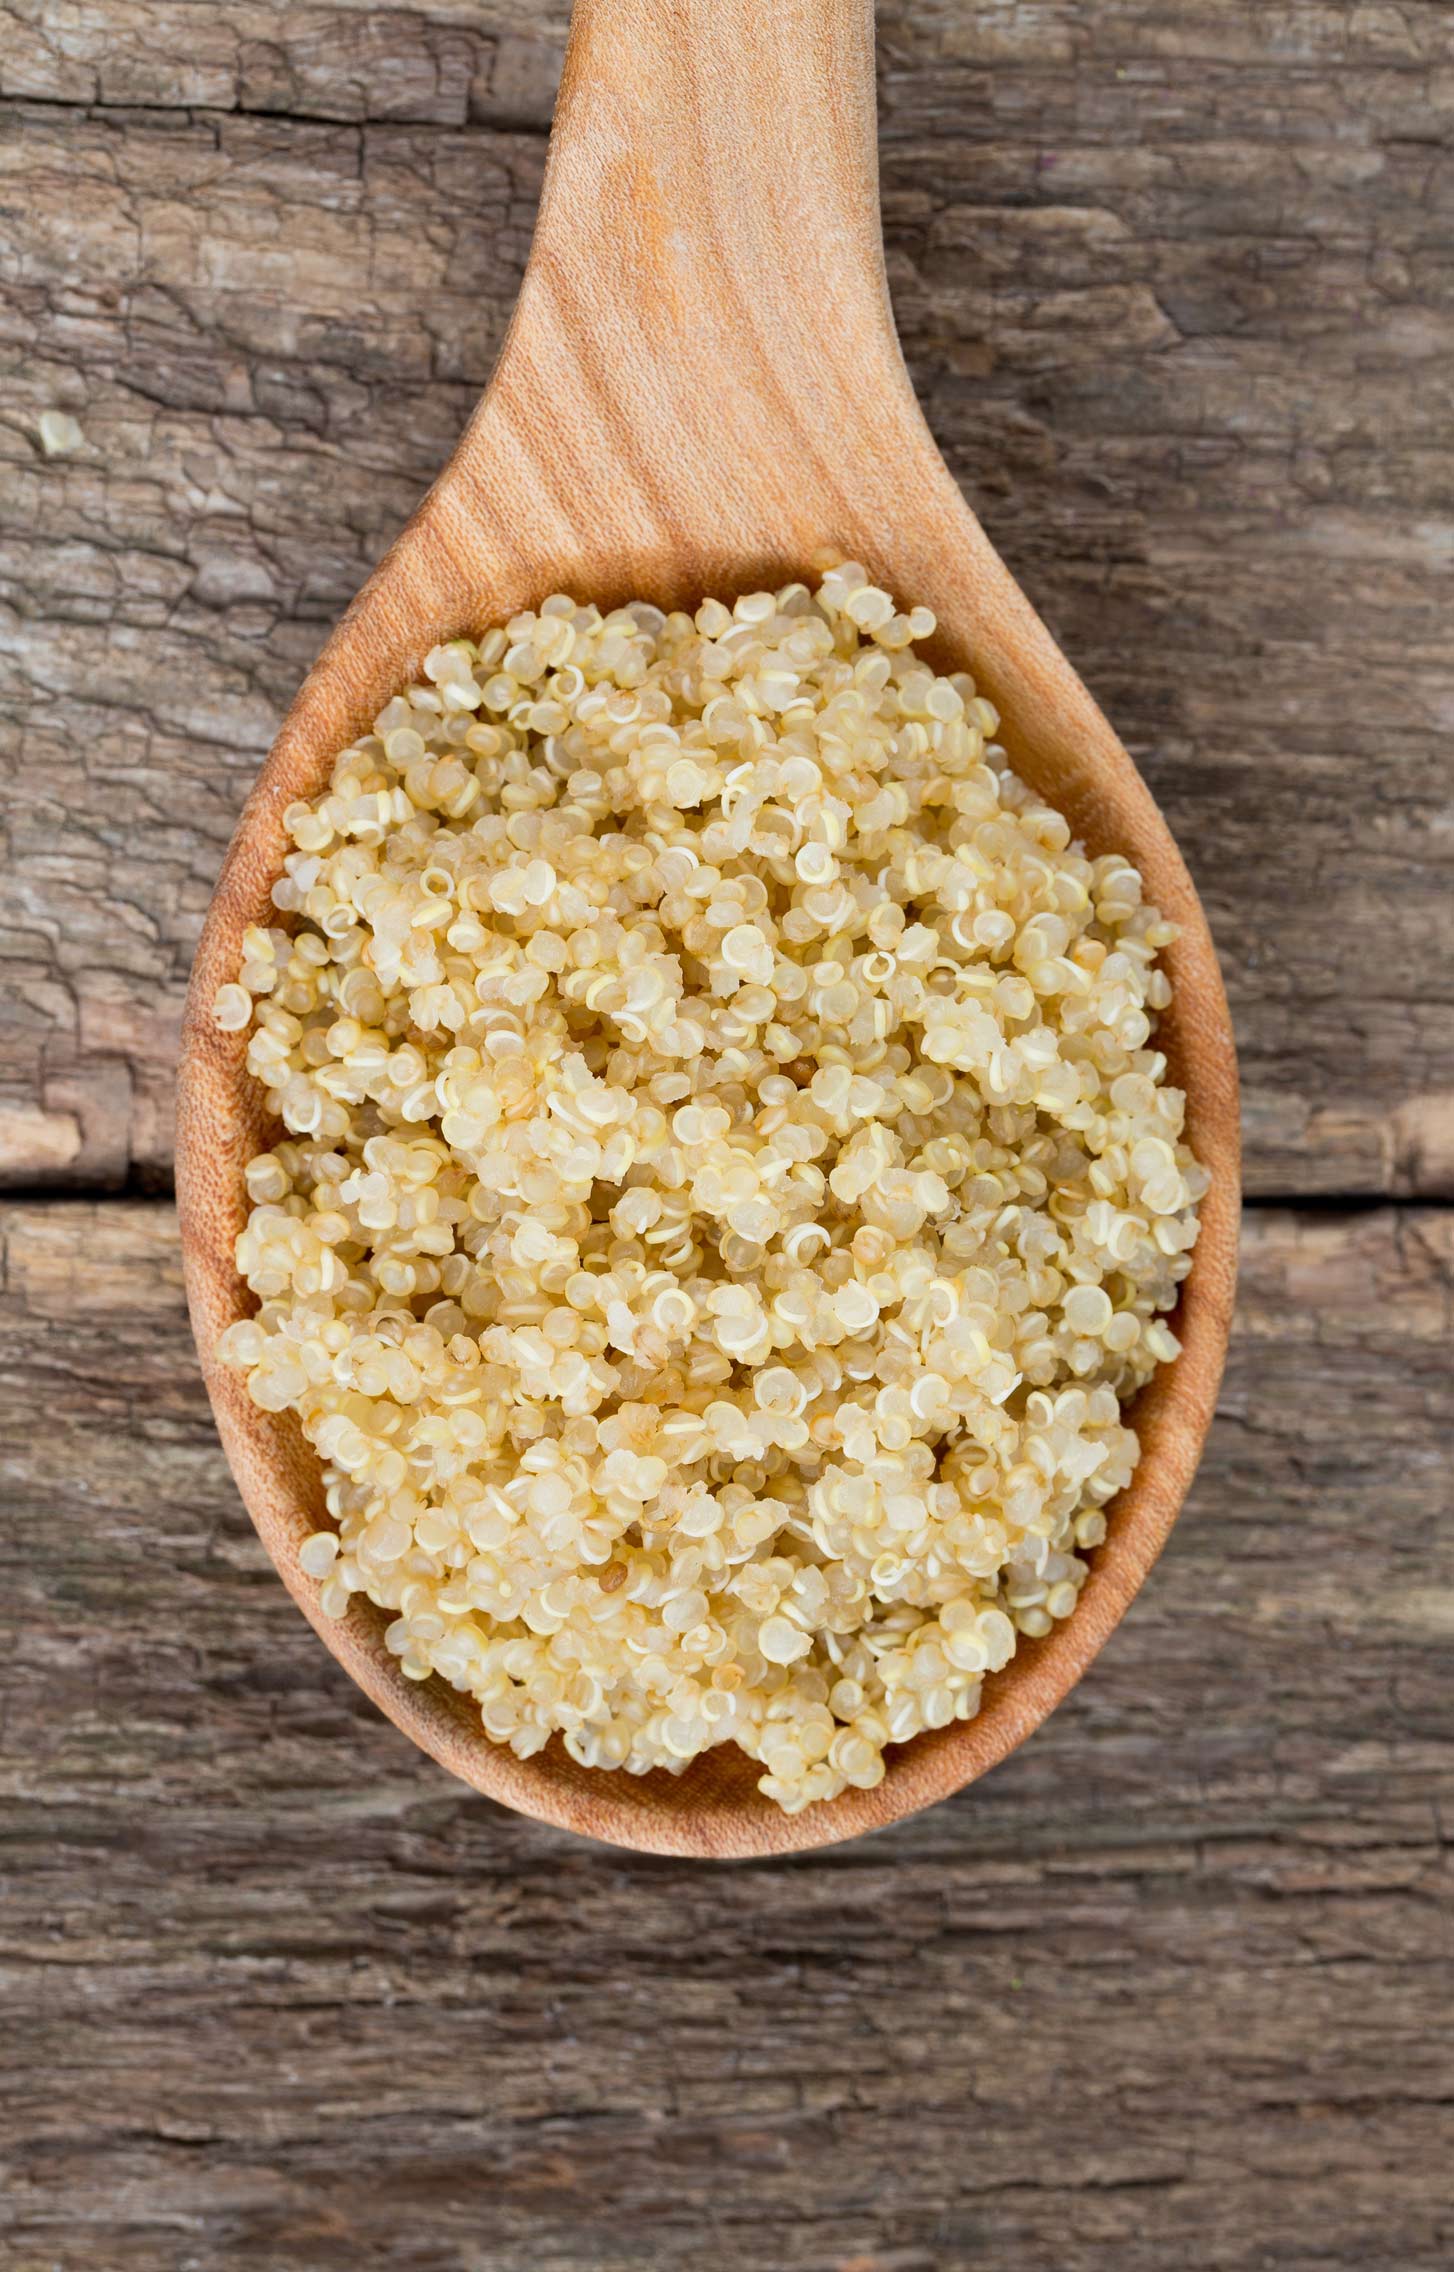 A wooden spoon with cooked quinoa on a rustic wooden background.